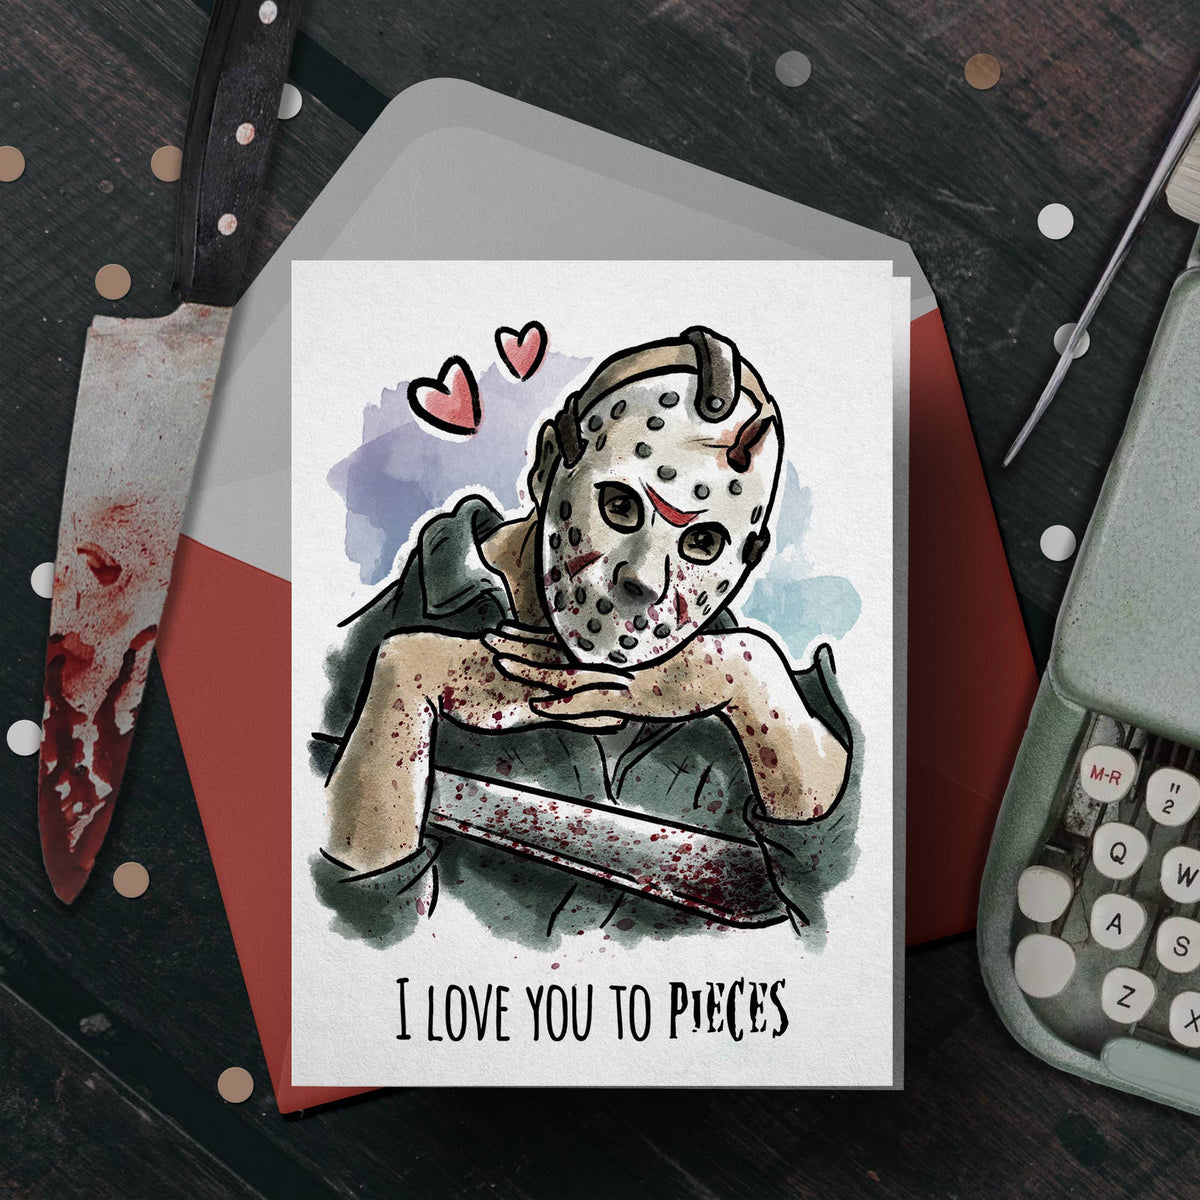 Love you to Pieces - Jason Friday 13th Horror Valentine Card